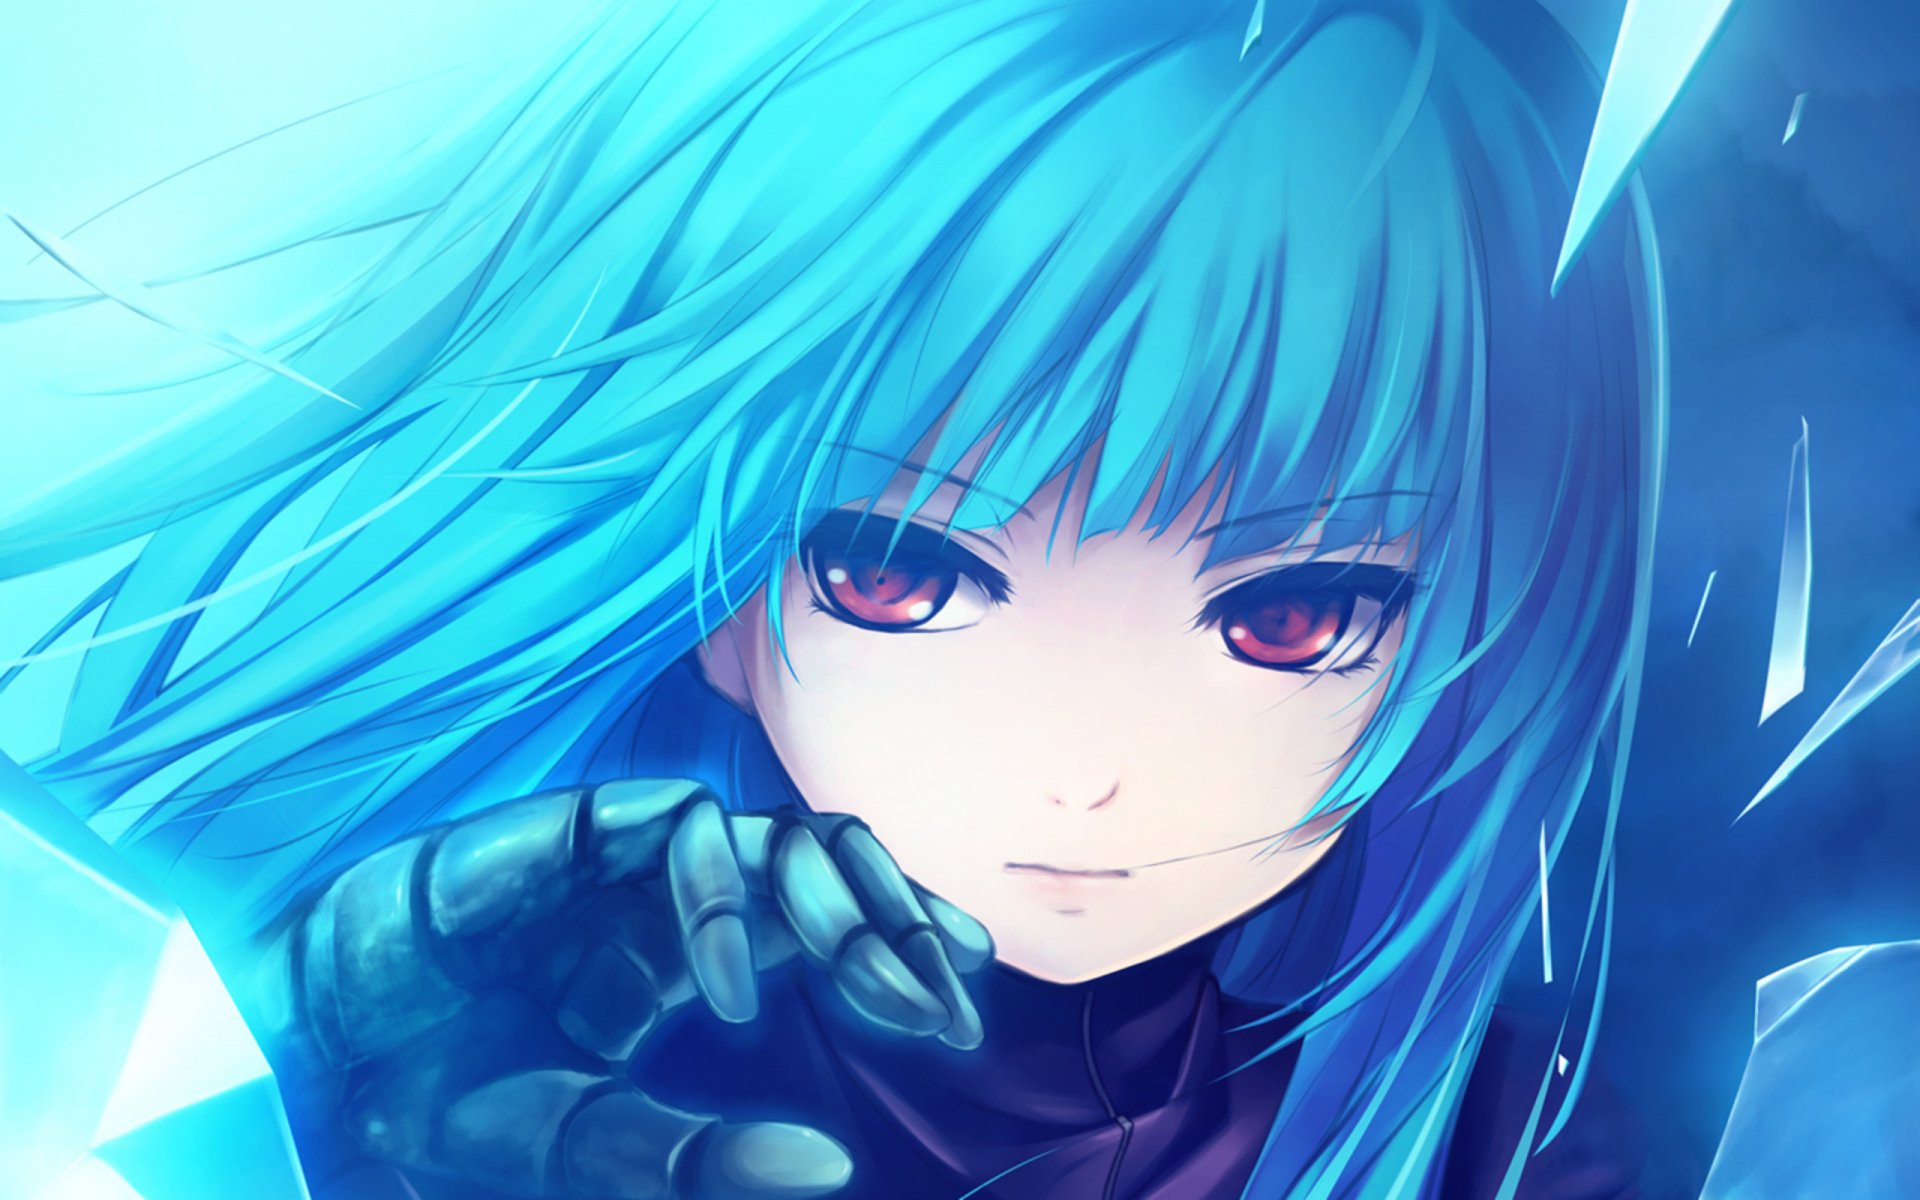 Anime animated artwork for steam фото 99